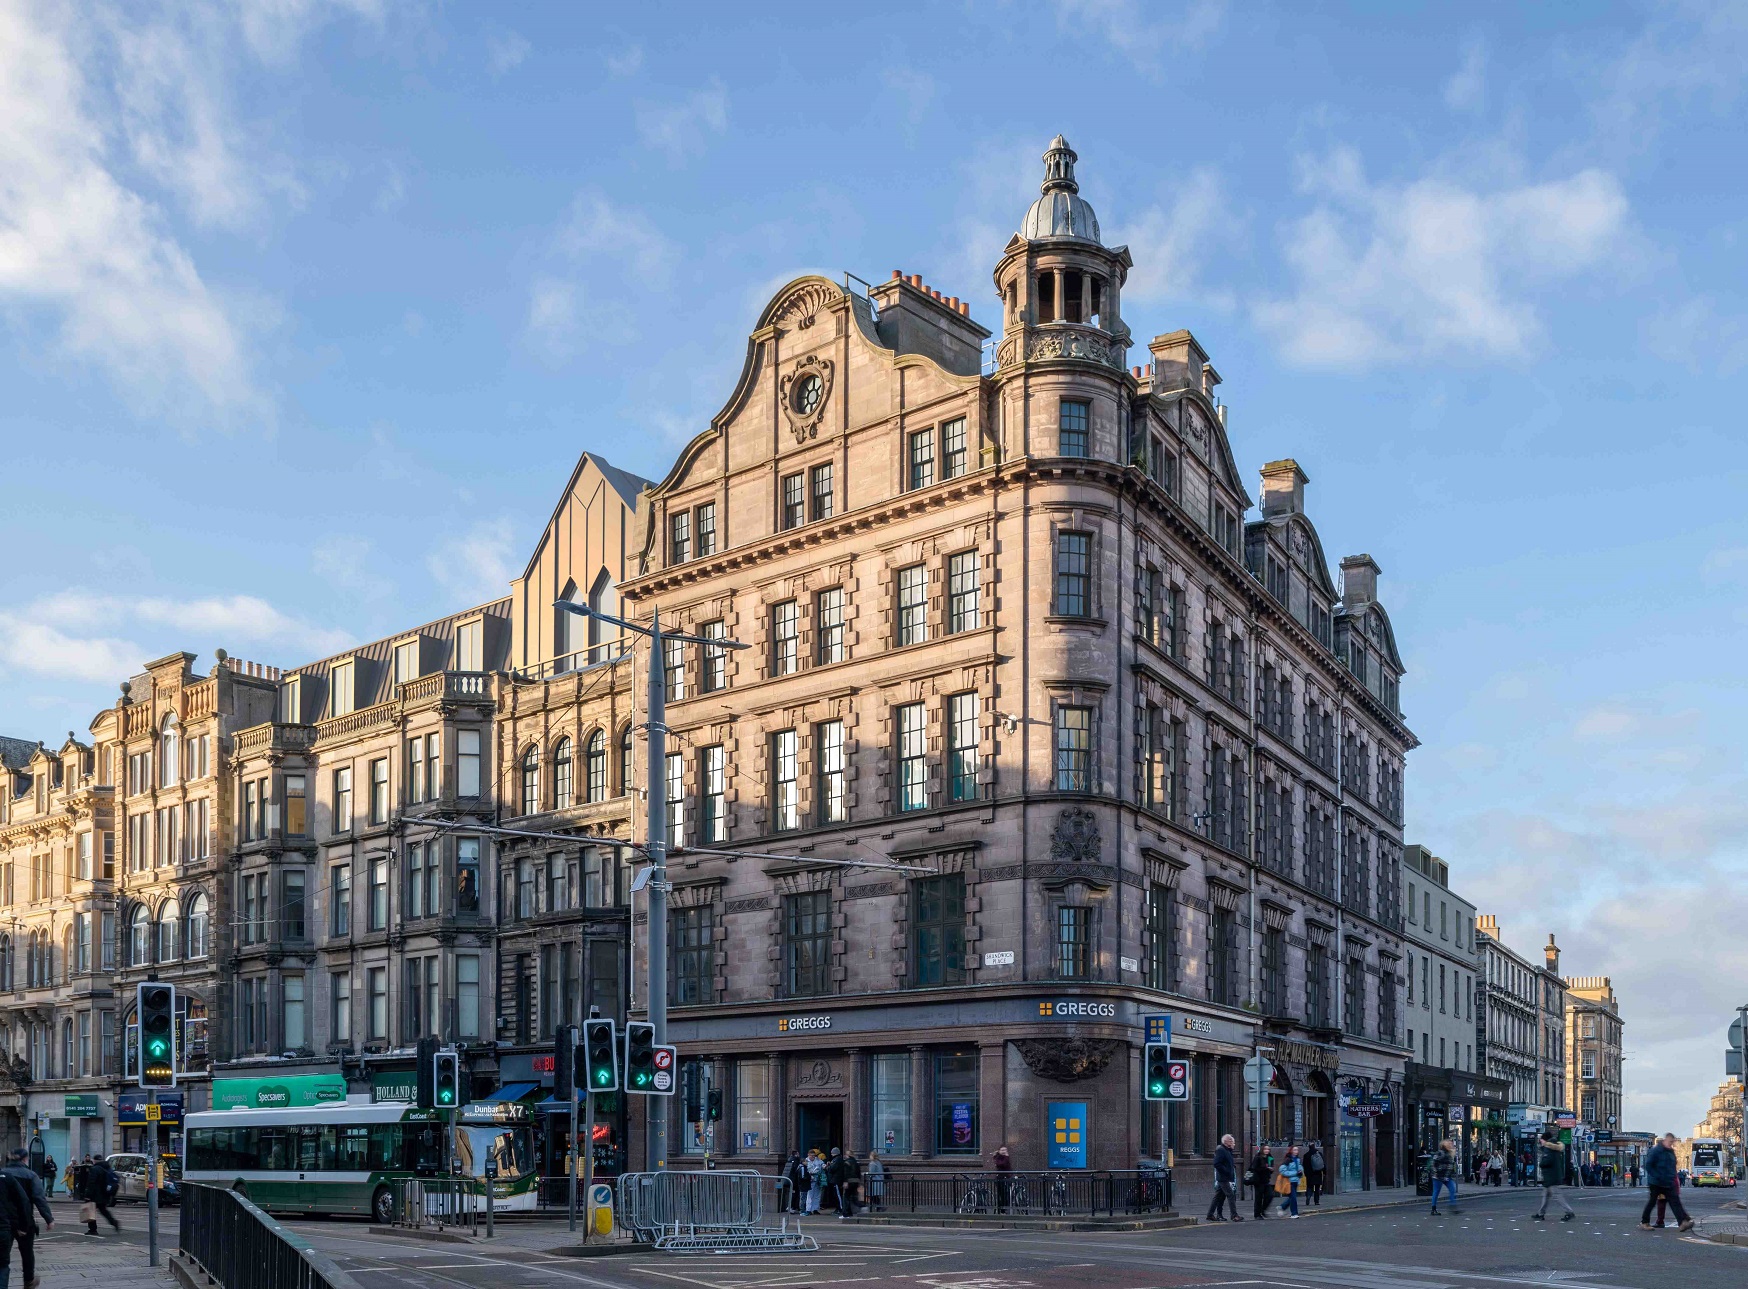 Mixed-use hospitality space to spruce up historic Edinburgh buildings